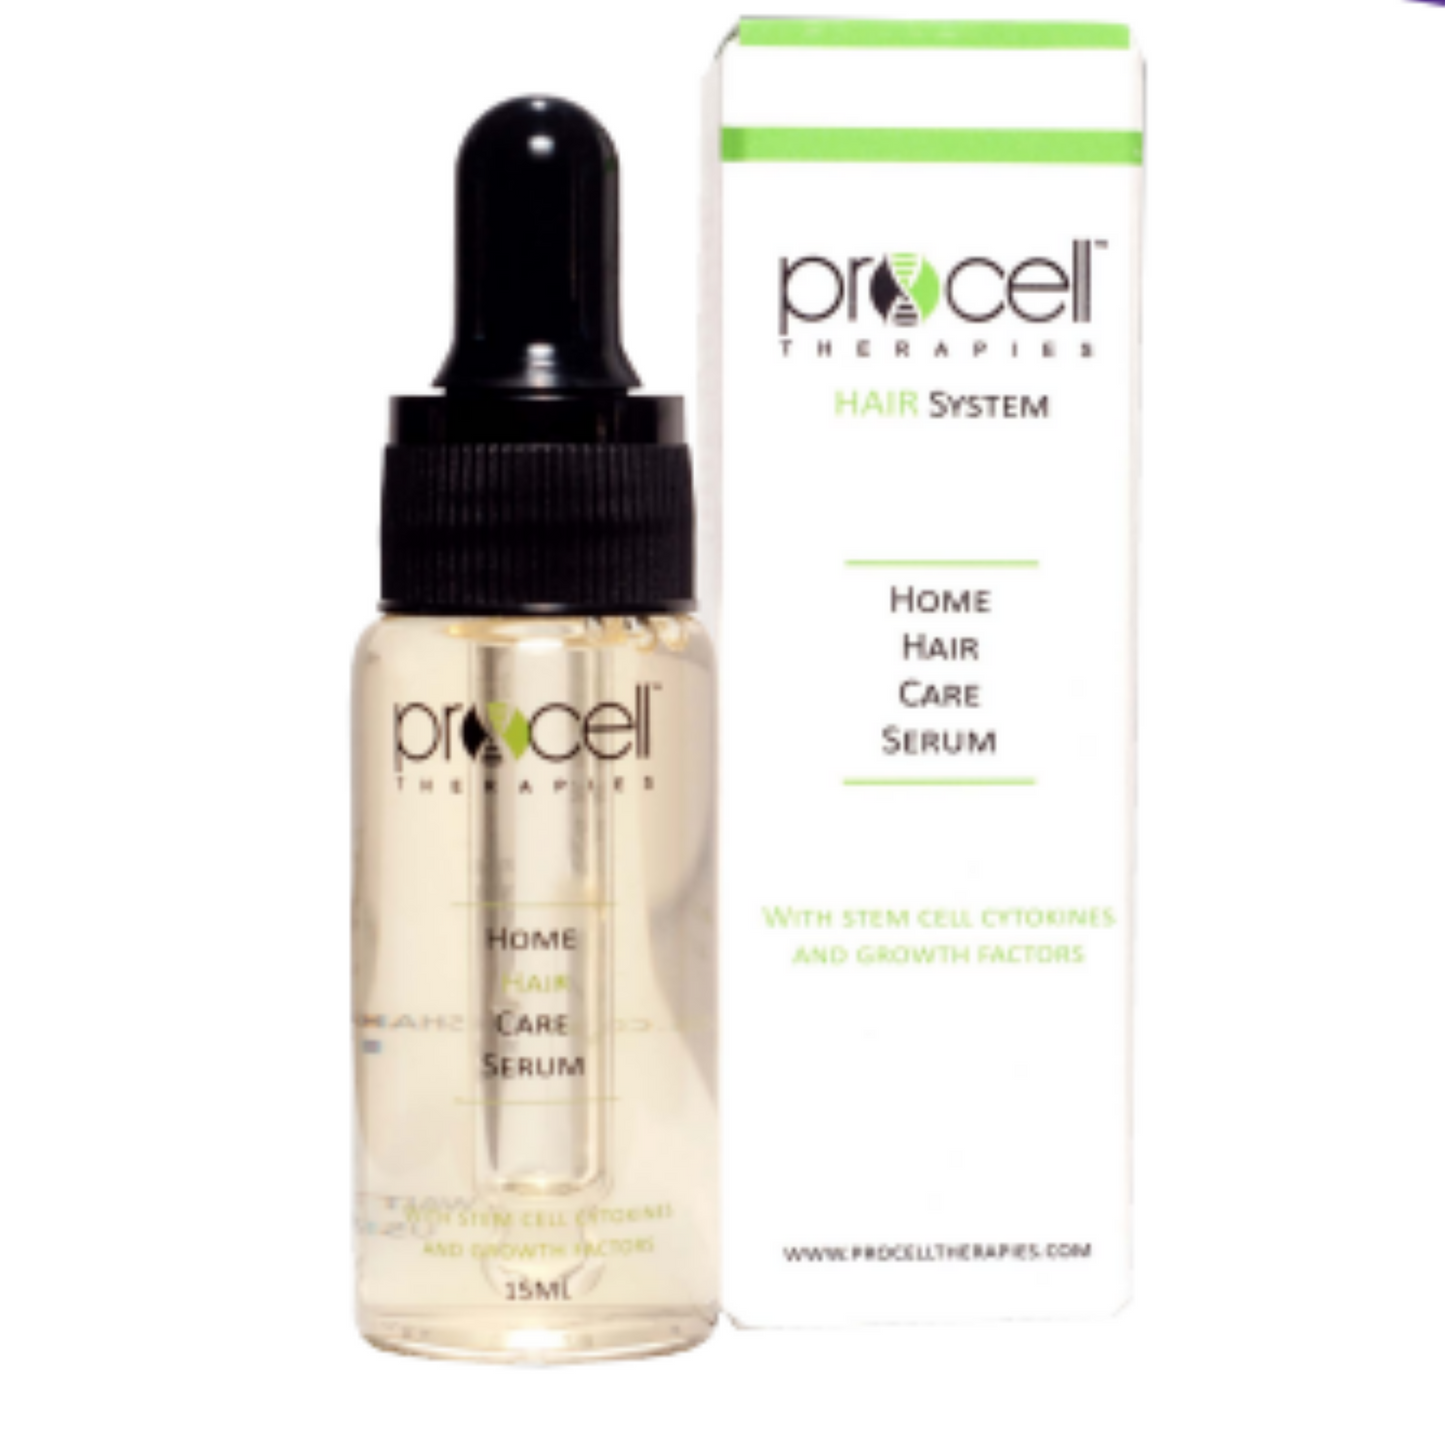 ProCell™ Therapies Home Haircare Serum